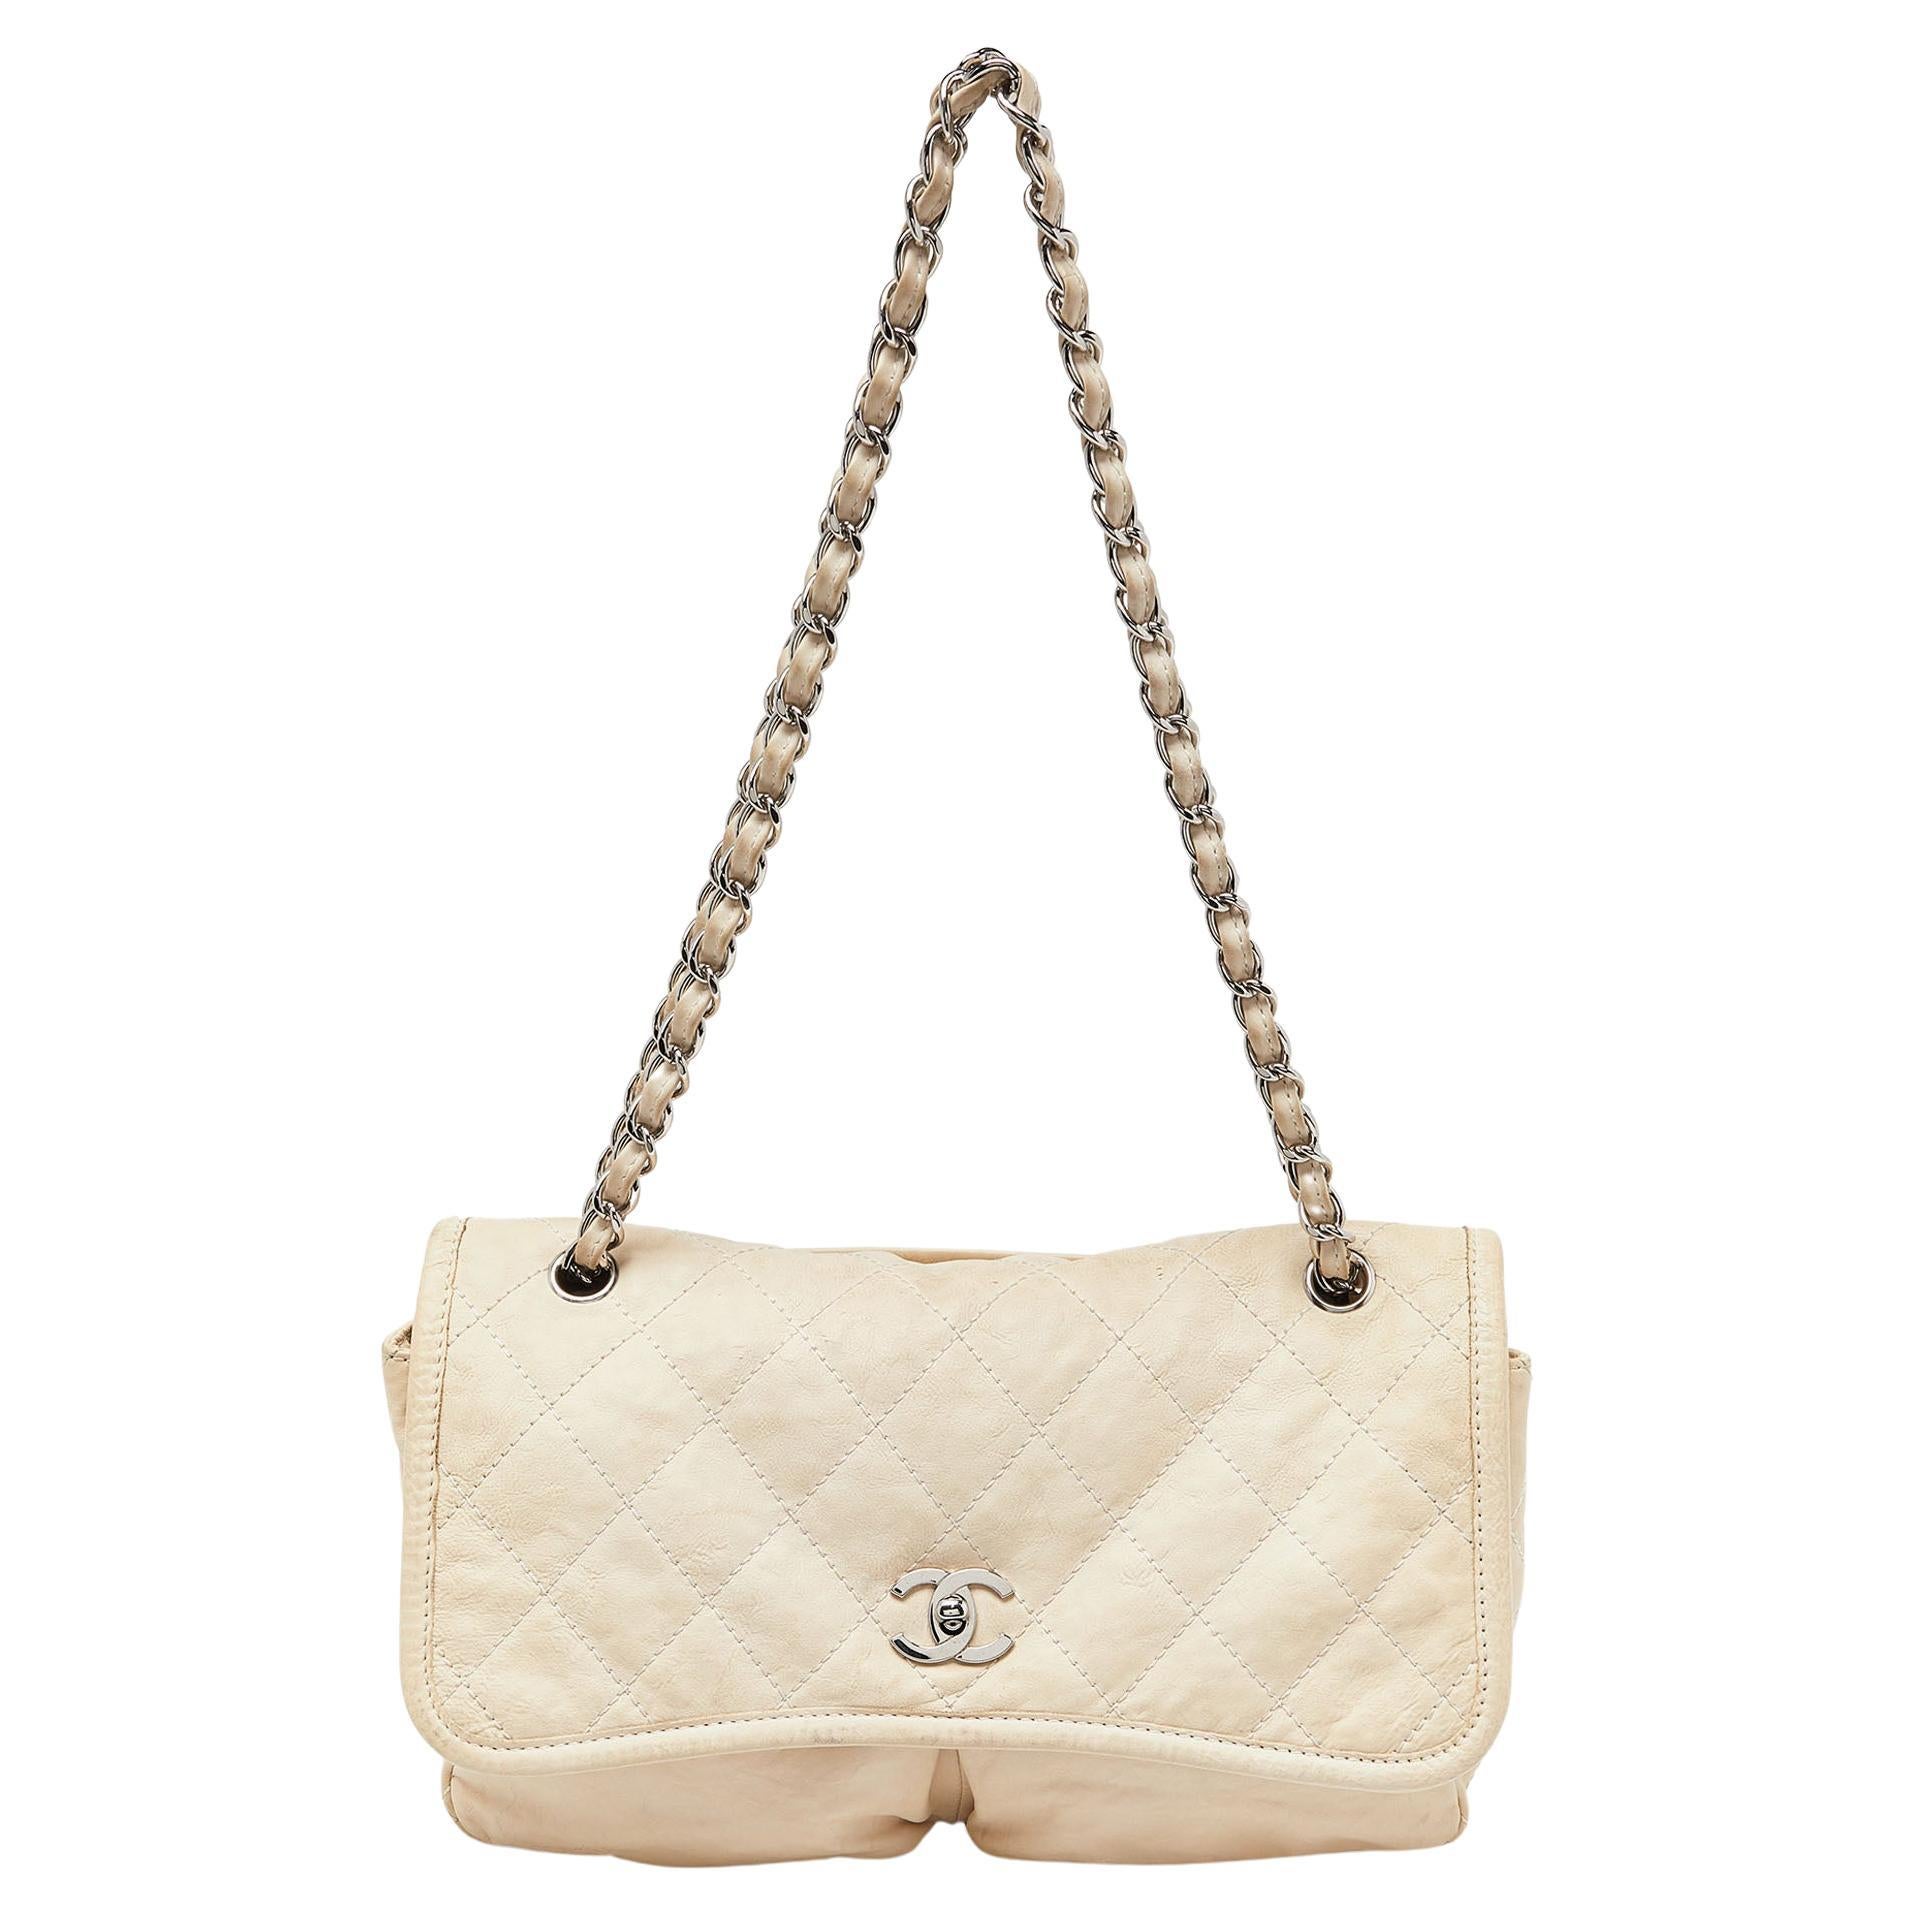 Chanel Off White Quilted Leather Split Pocket Flap Bag